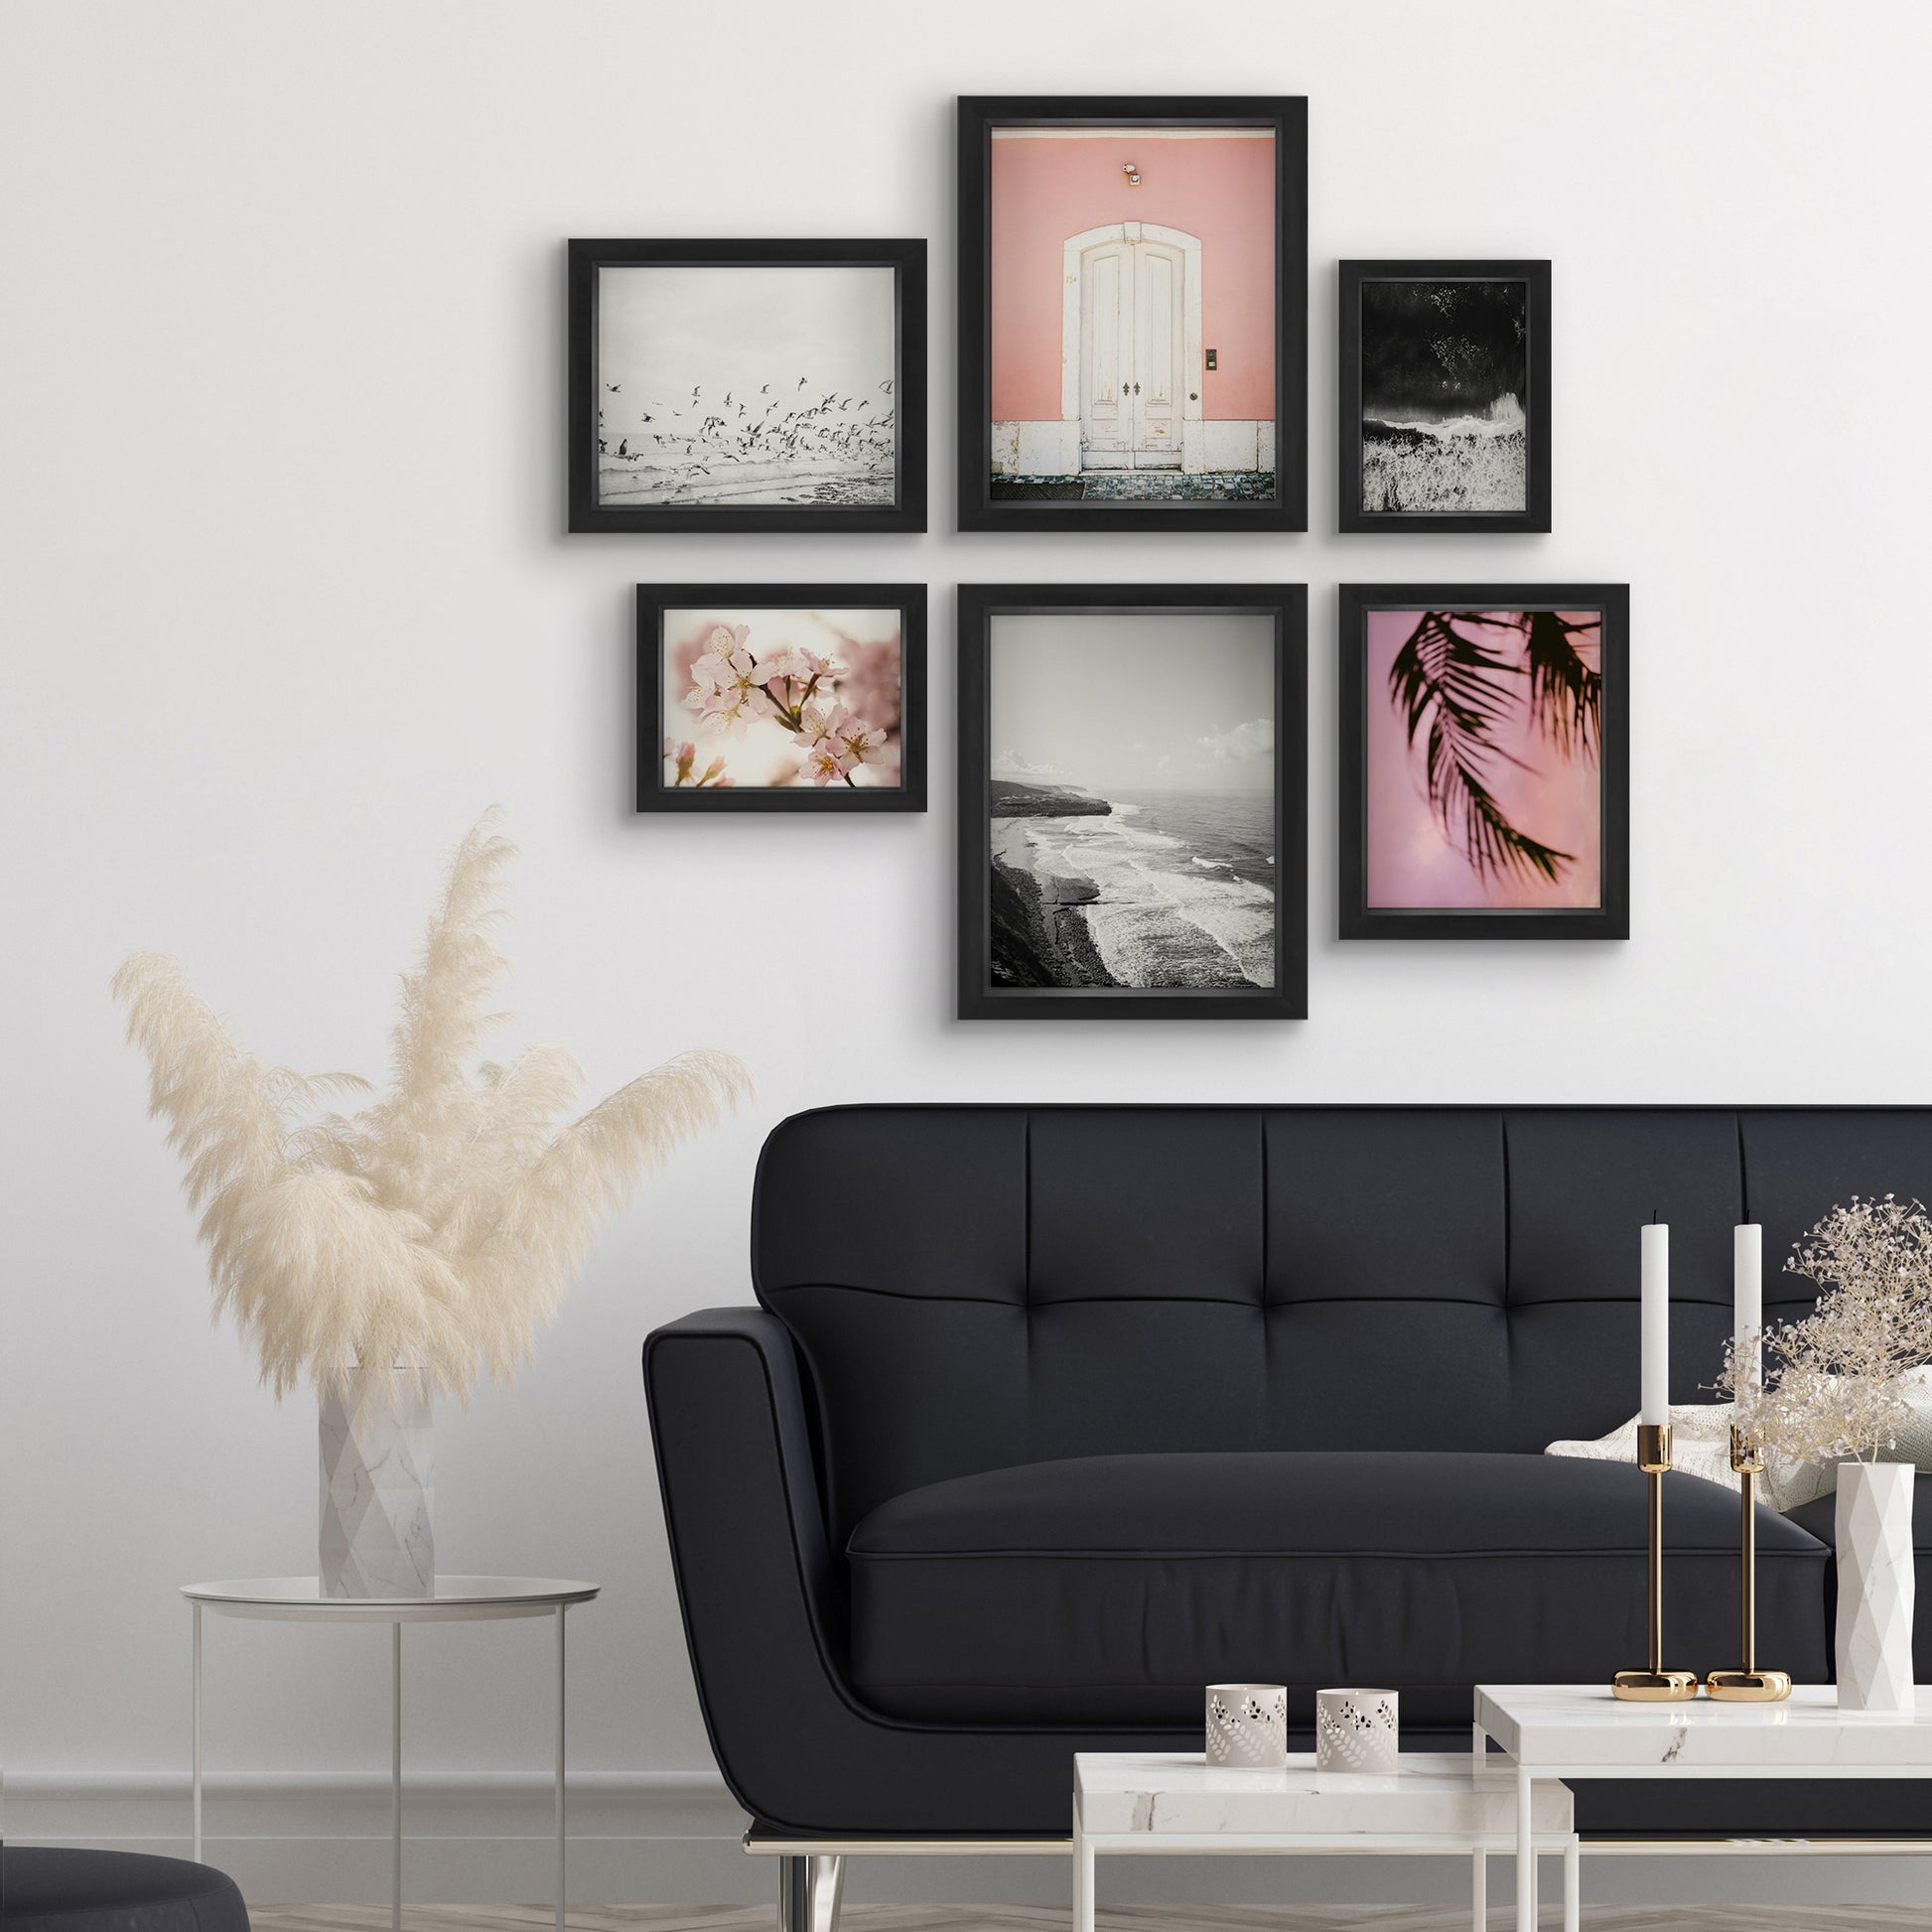 Black and White Travel Gallery Wall and Other Gallery Wall Ideas